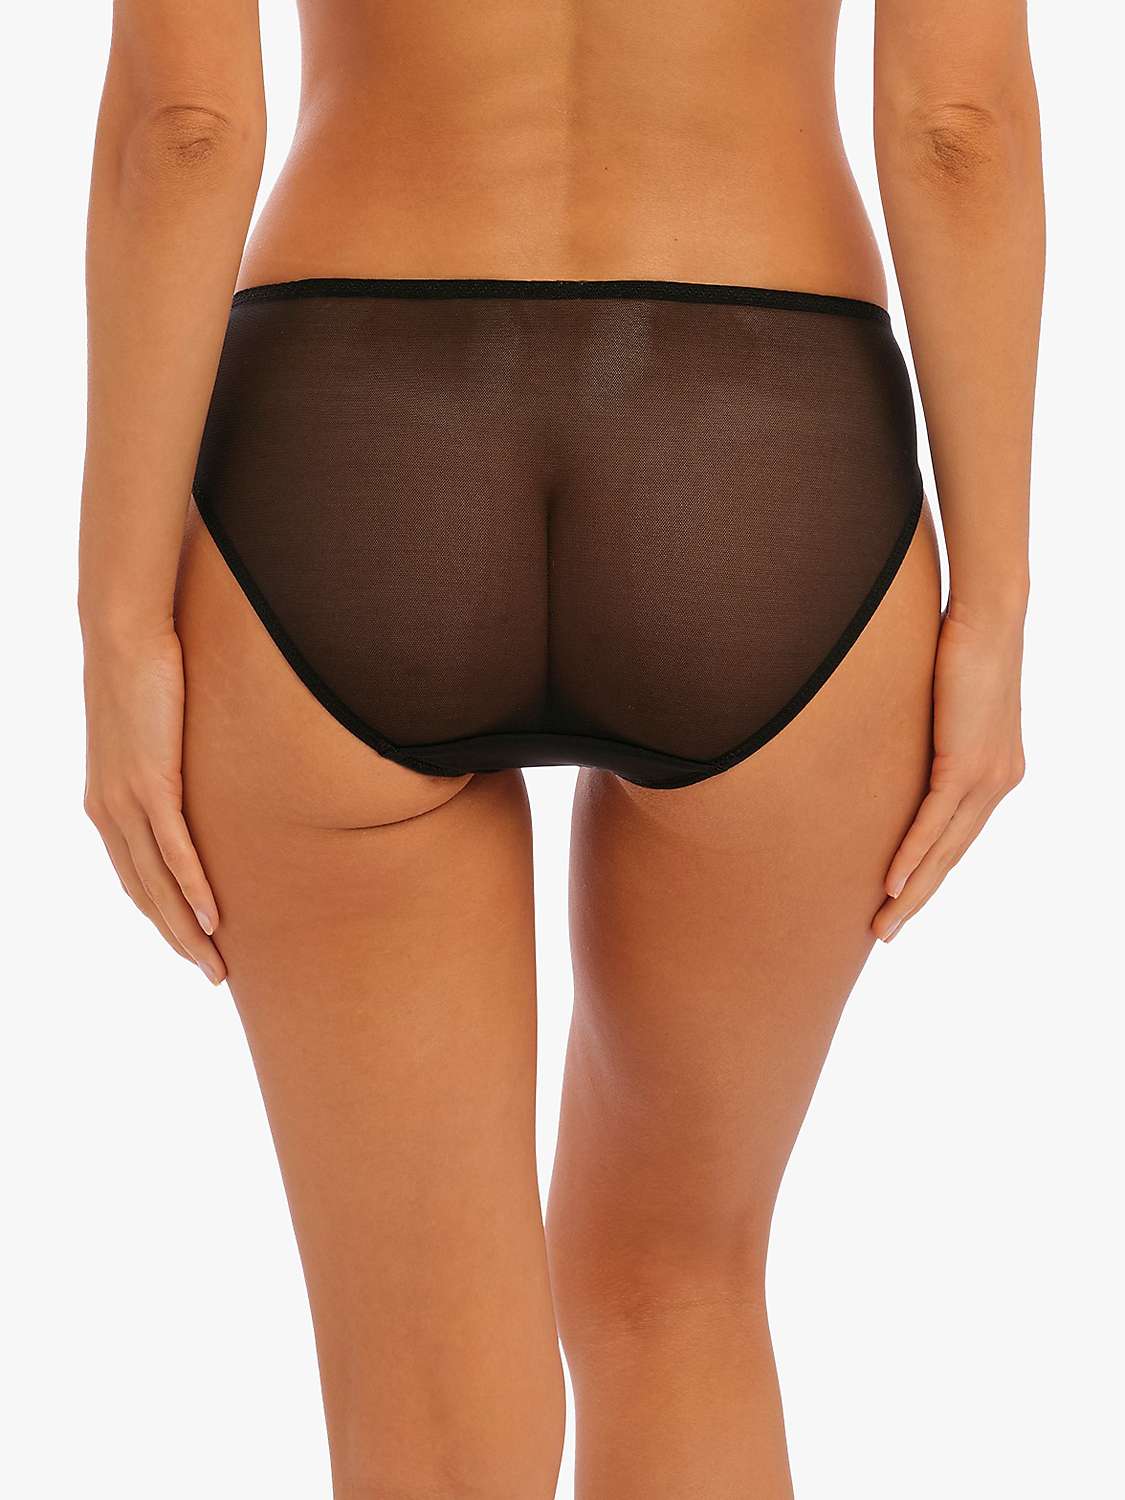 Buy Wacoal Embrace Lace Knickers Online at johnlewis.com